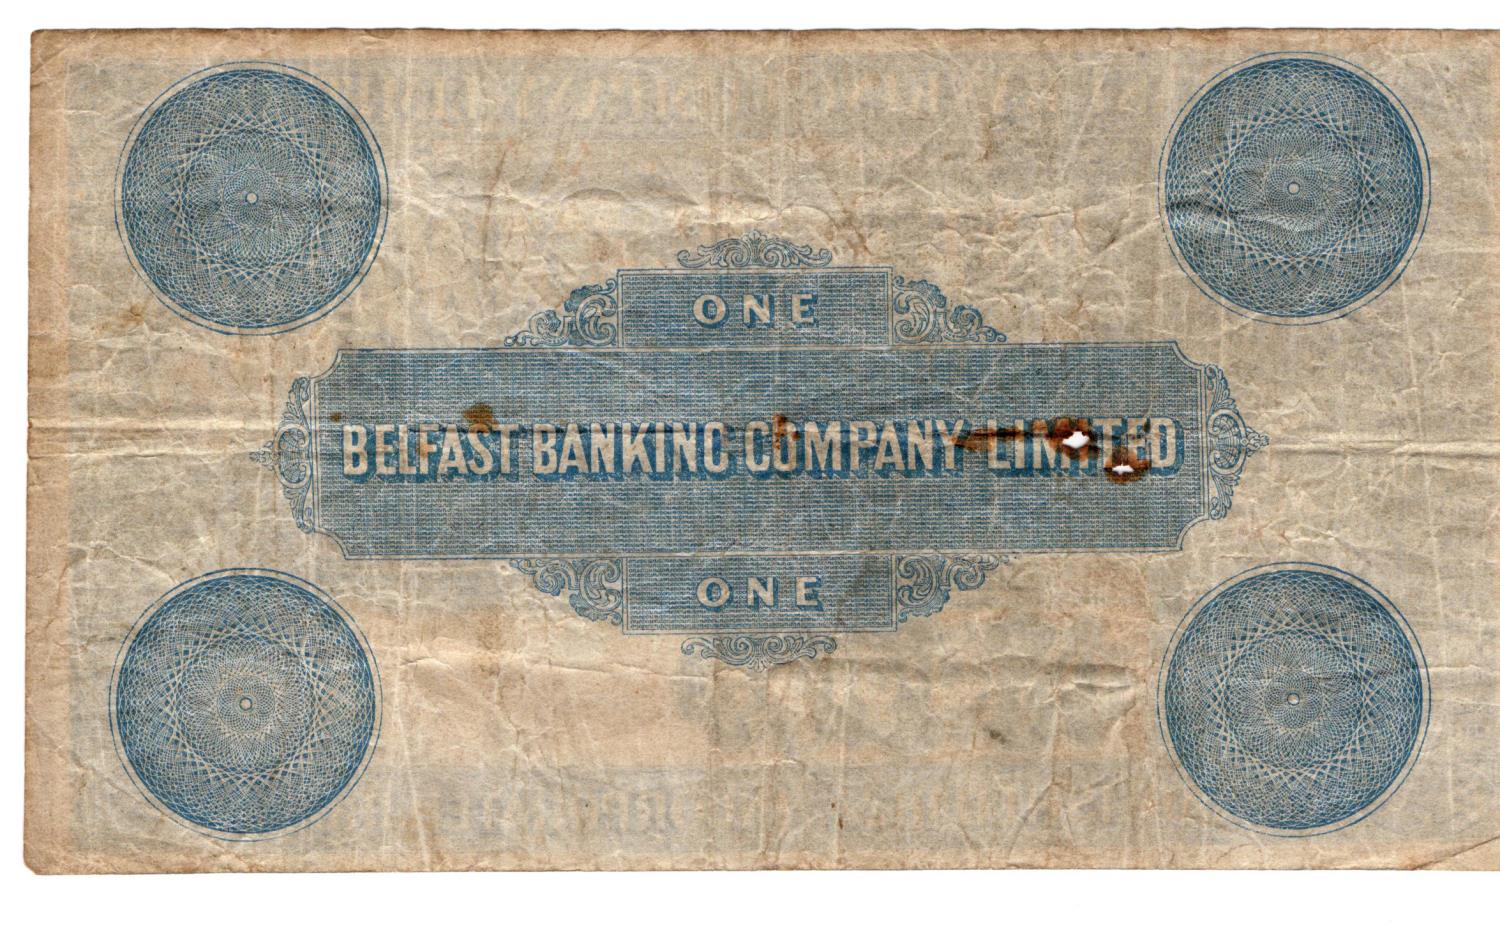 Northern Ireland, Belfast Banking Company Limited 1 Pound dated 5th February 1915, handsigned, - Image 2 of 2